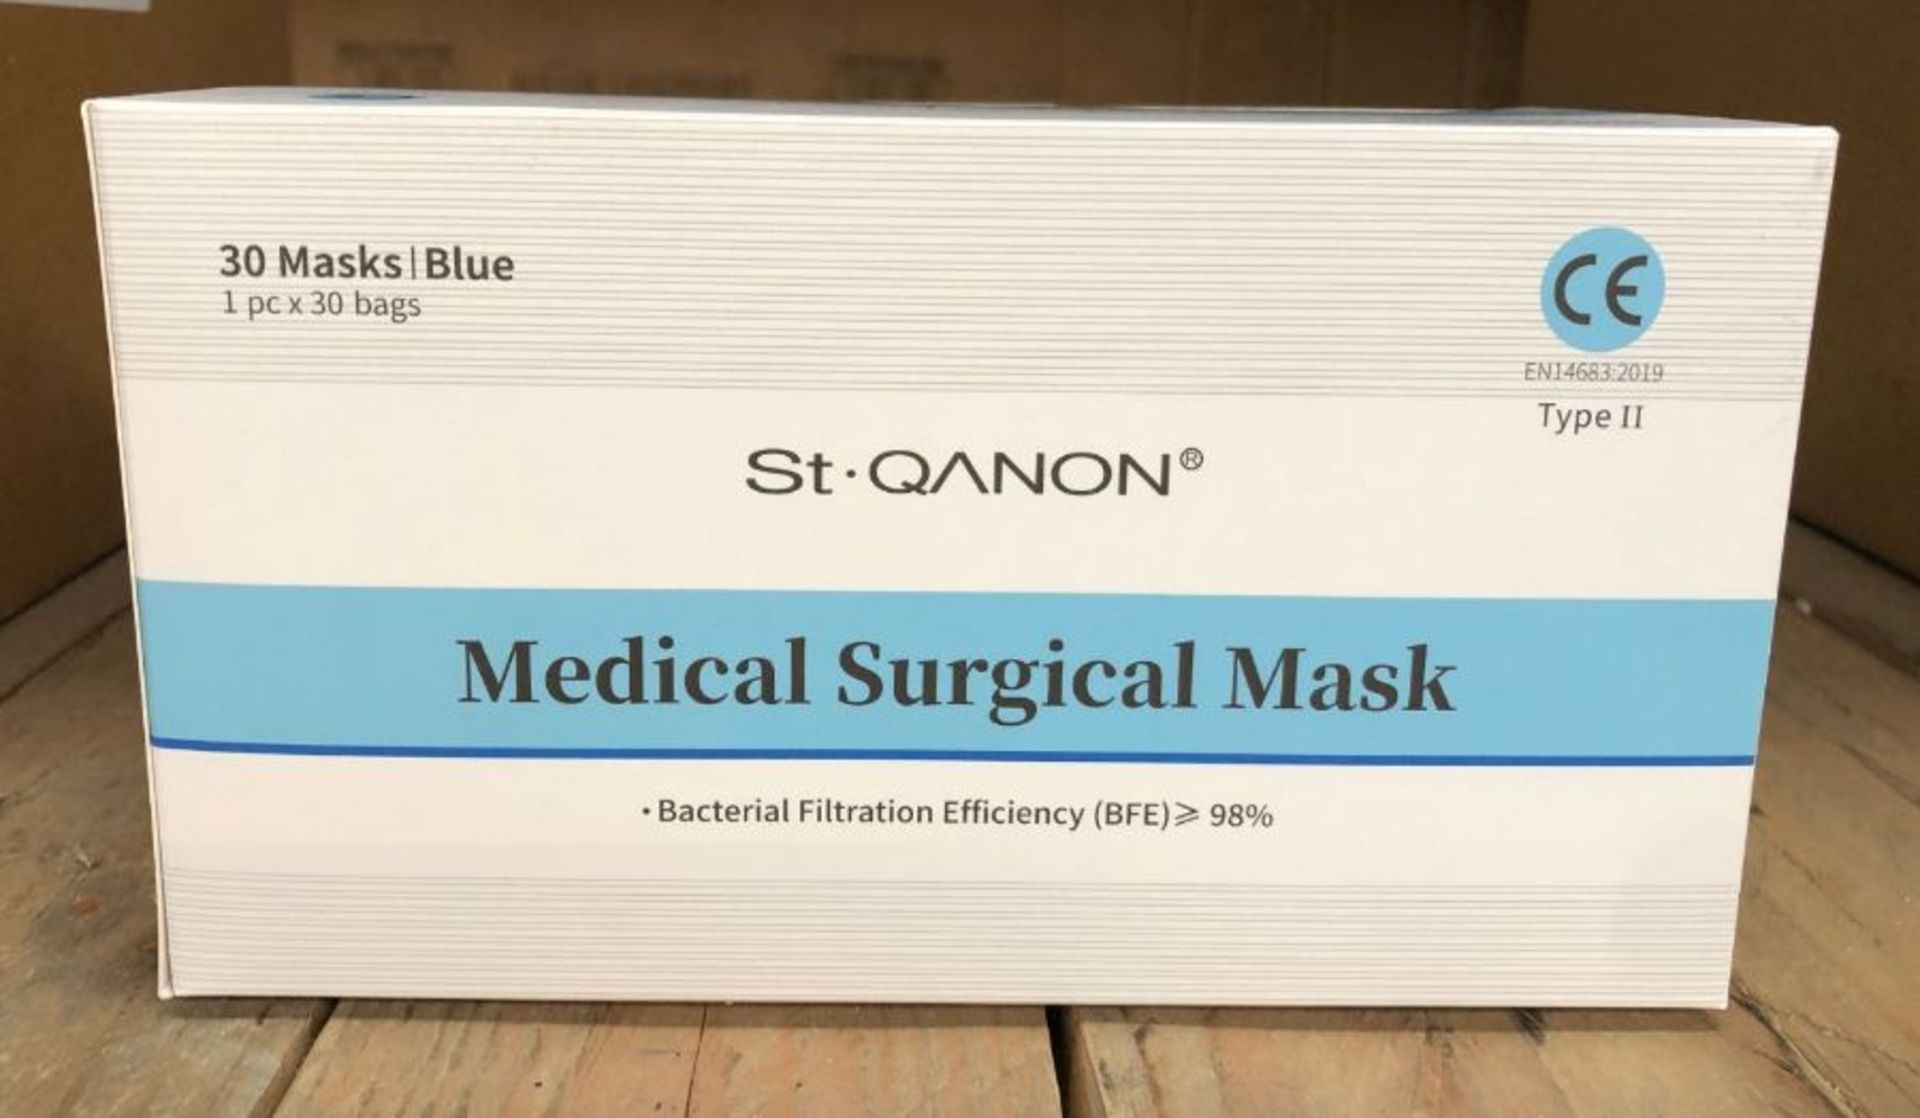 50 X PACKS OF ST QANON MEDICAL SURGICAL MASKS - 30 MASKS PER PACK / AS NEW